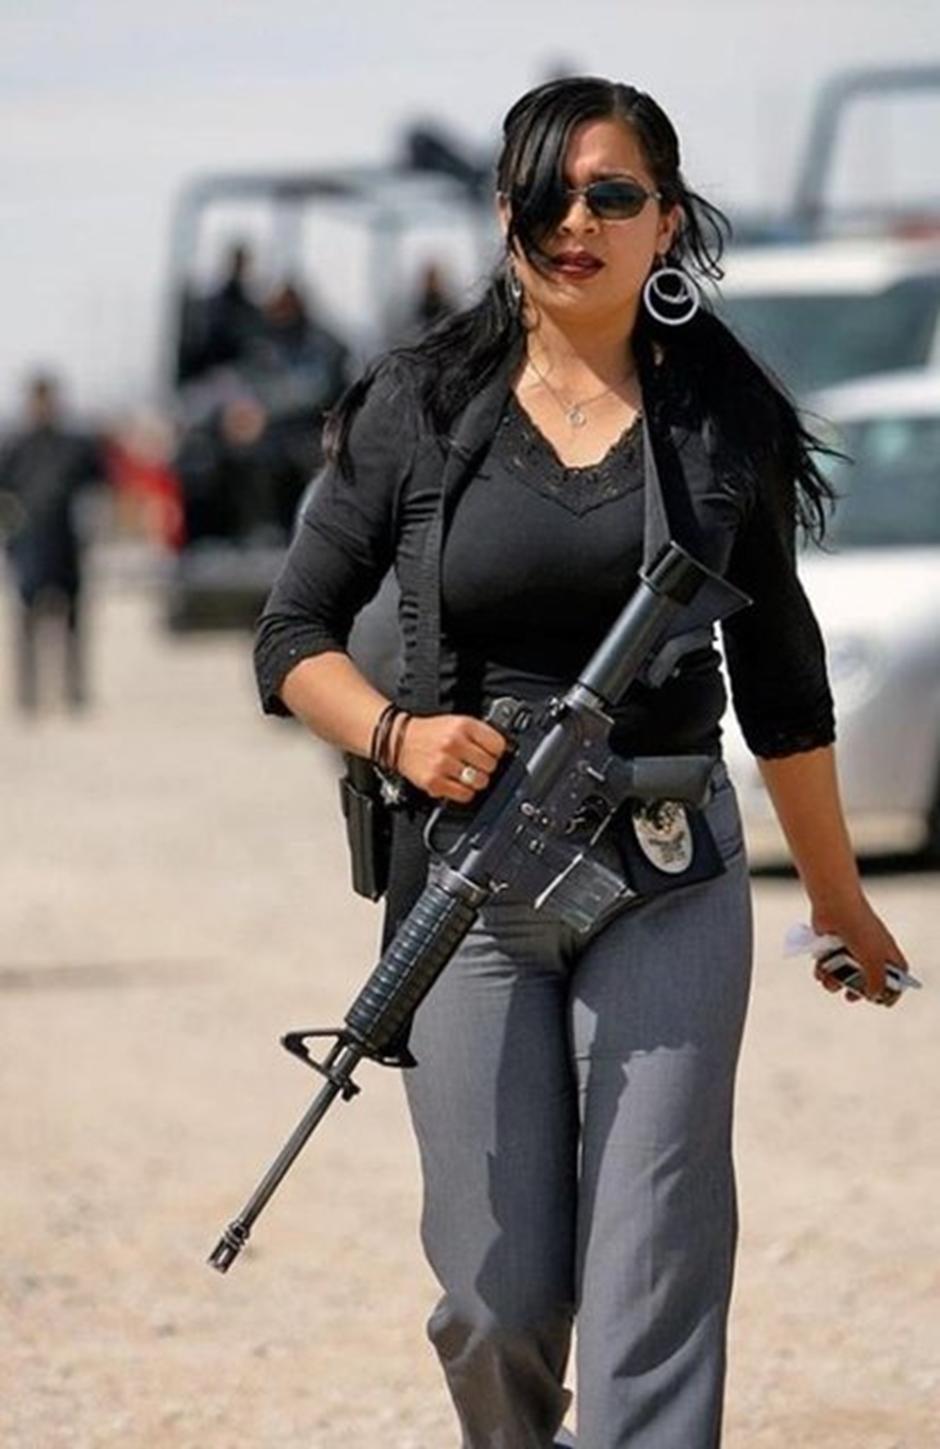 Woman with badge and assault rifle.